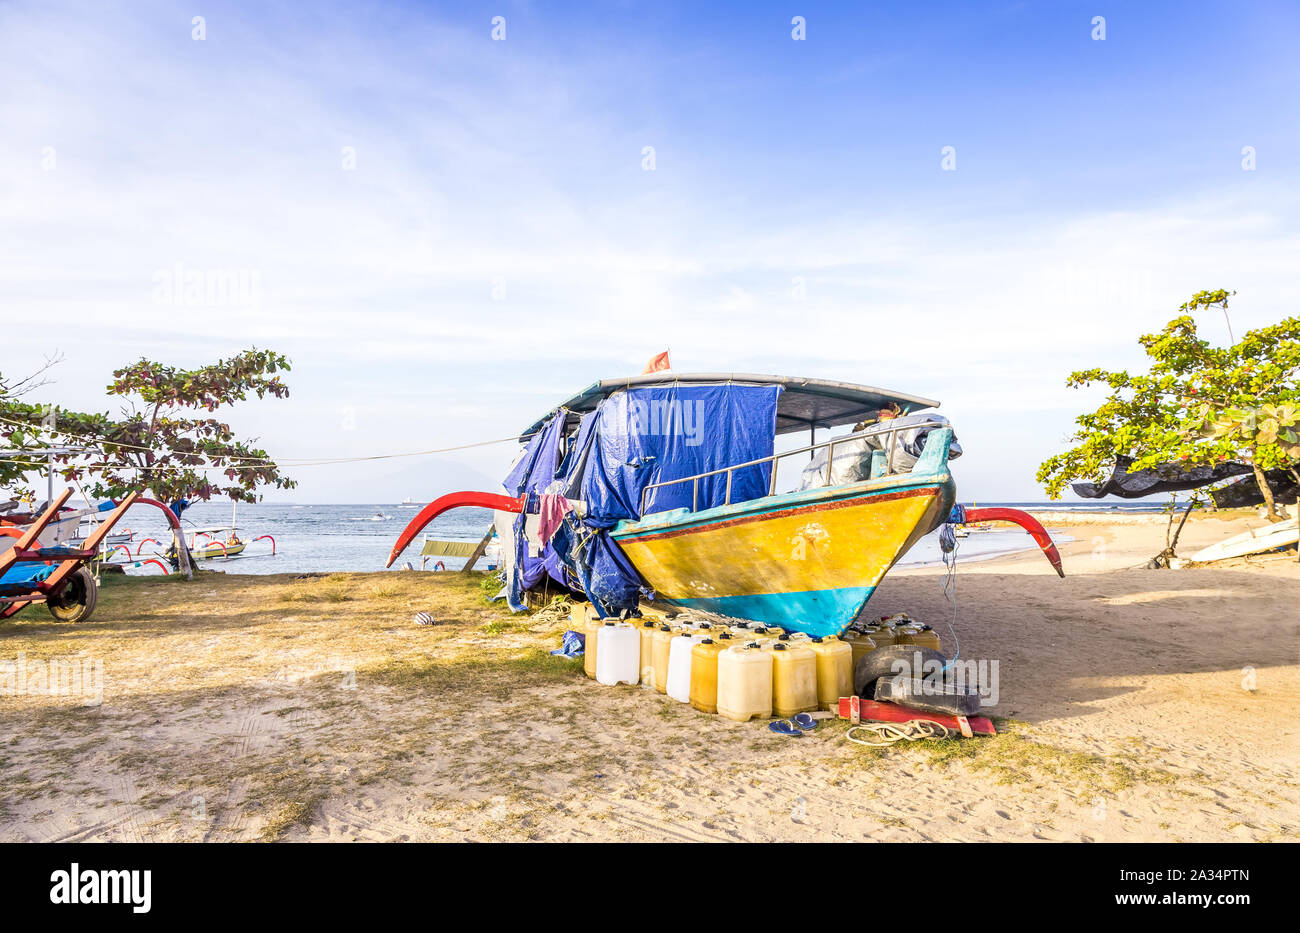 Colorful traditional fishing boat on balinese shore, Indonesia Stock Photo